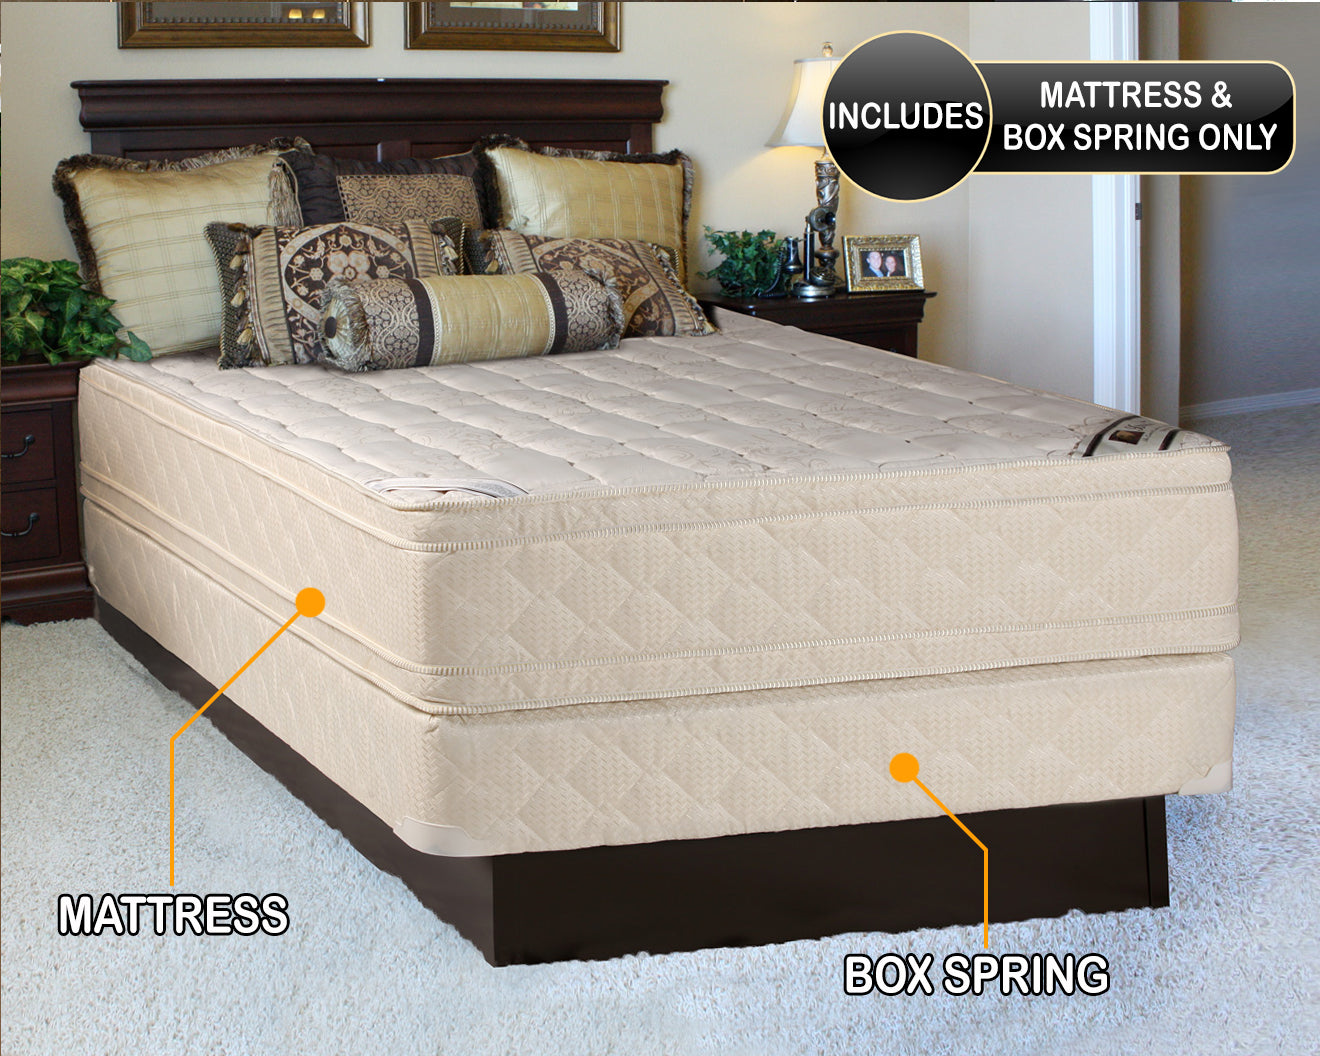 Elite Extrapedic Firm Comfort Pillow Top Queen Size Mattress and Box Spring Set